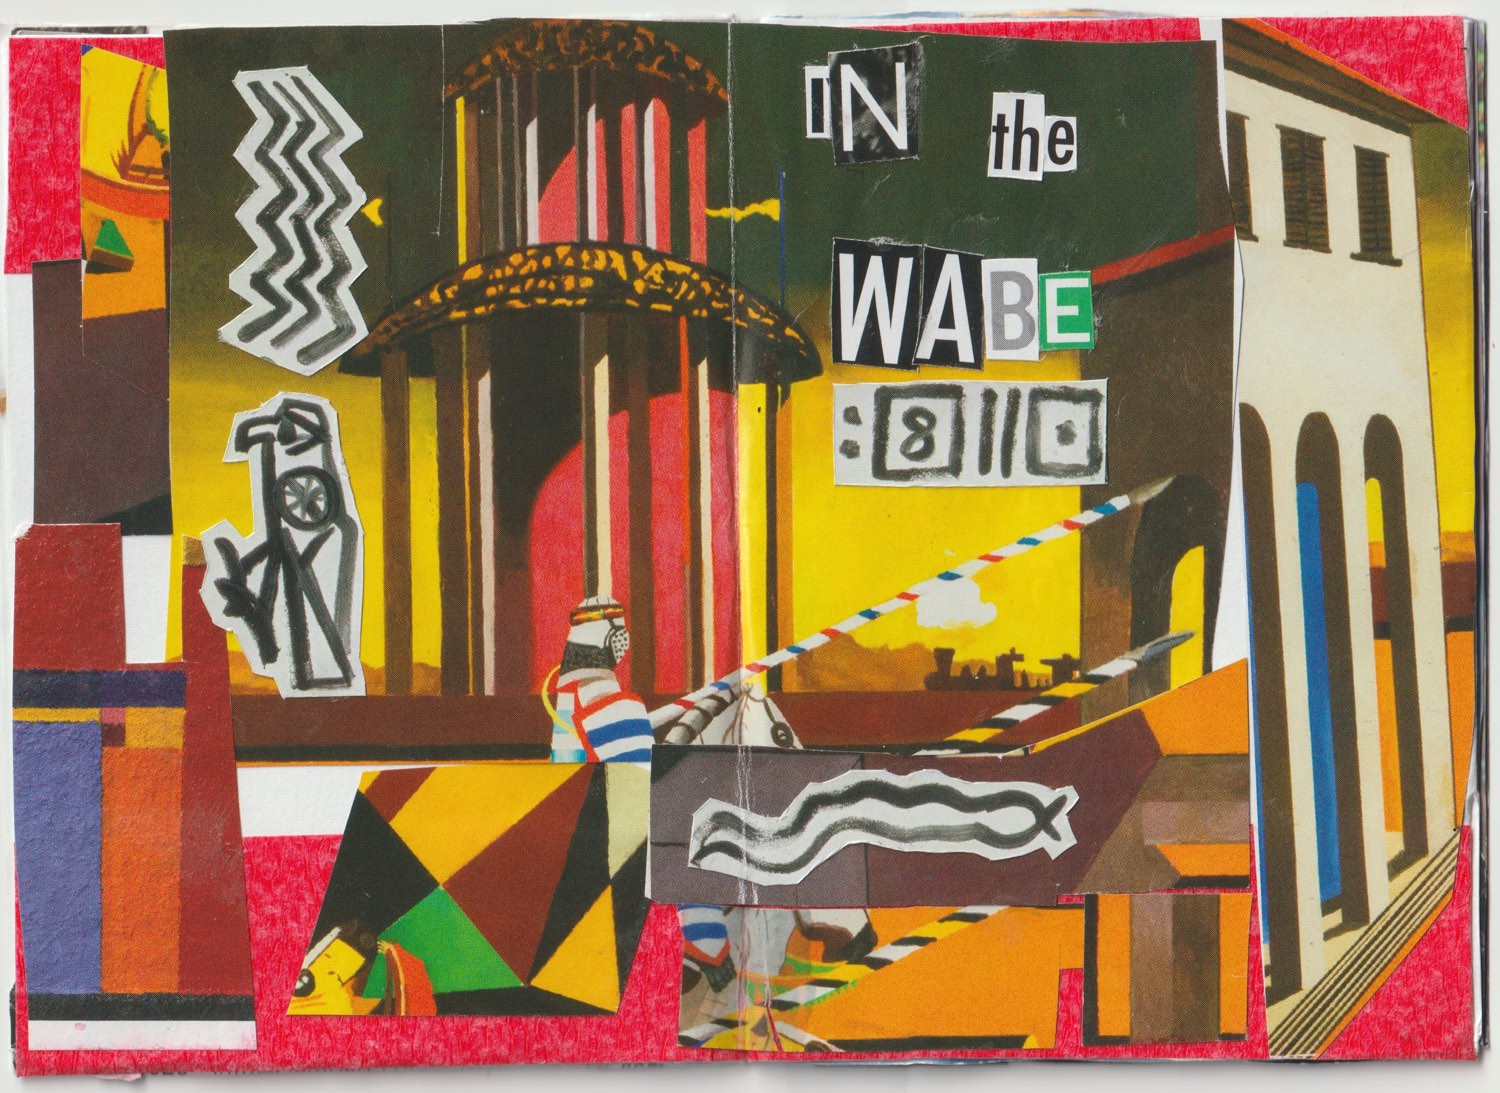 Interior of zine showing cut-out words and images with overpainting